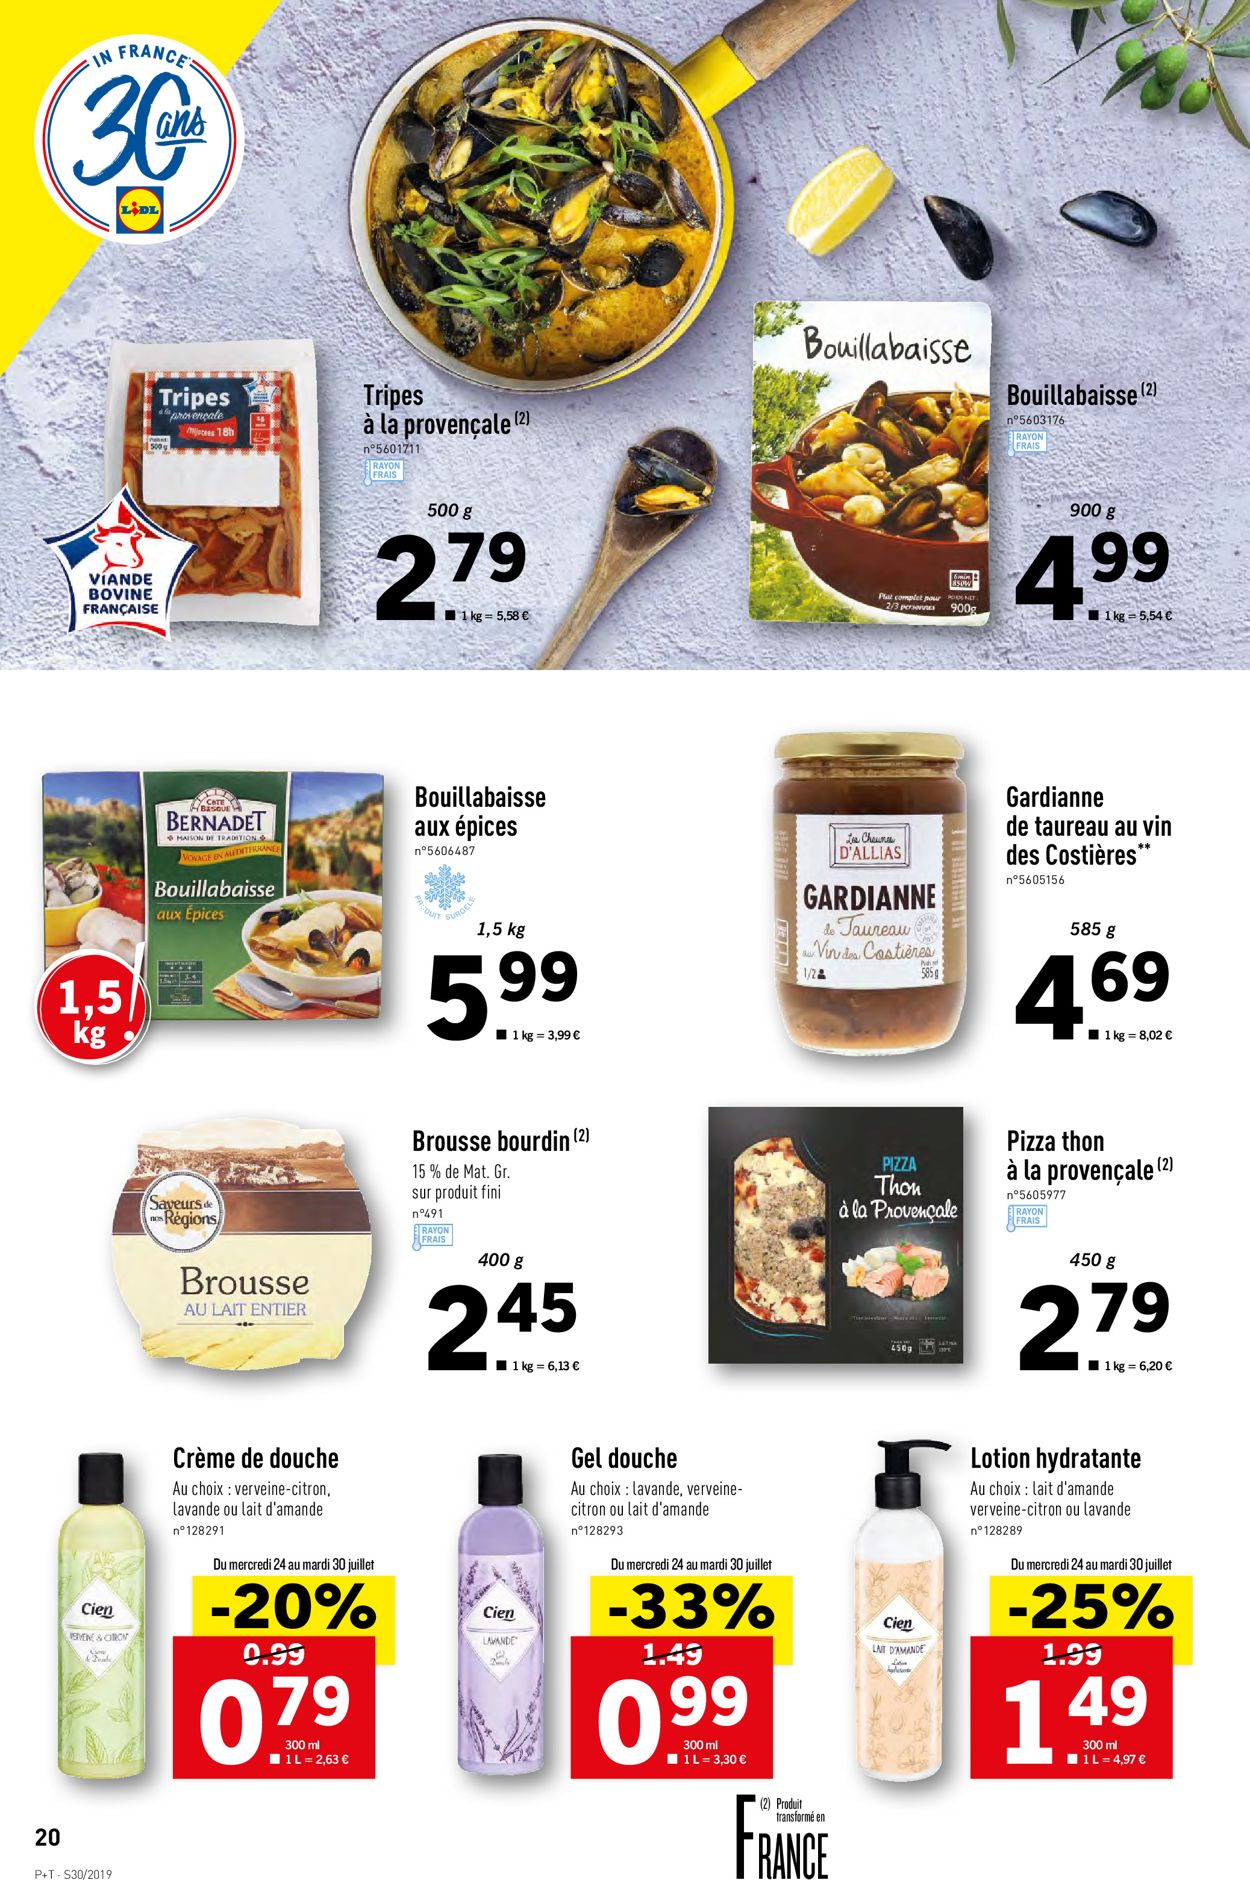 Lidl Catalogue - 24.07-30.07.2019 (Page 20)